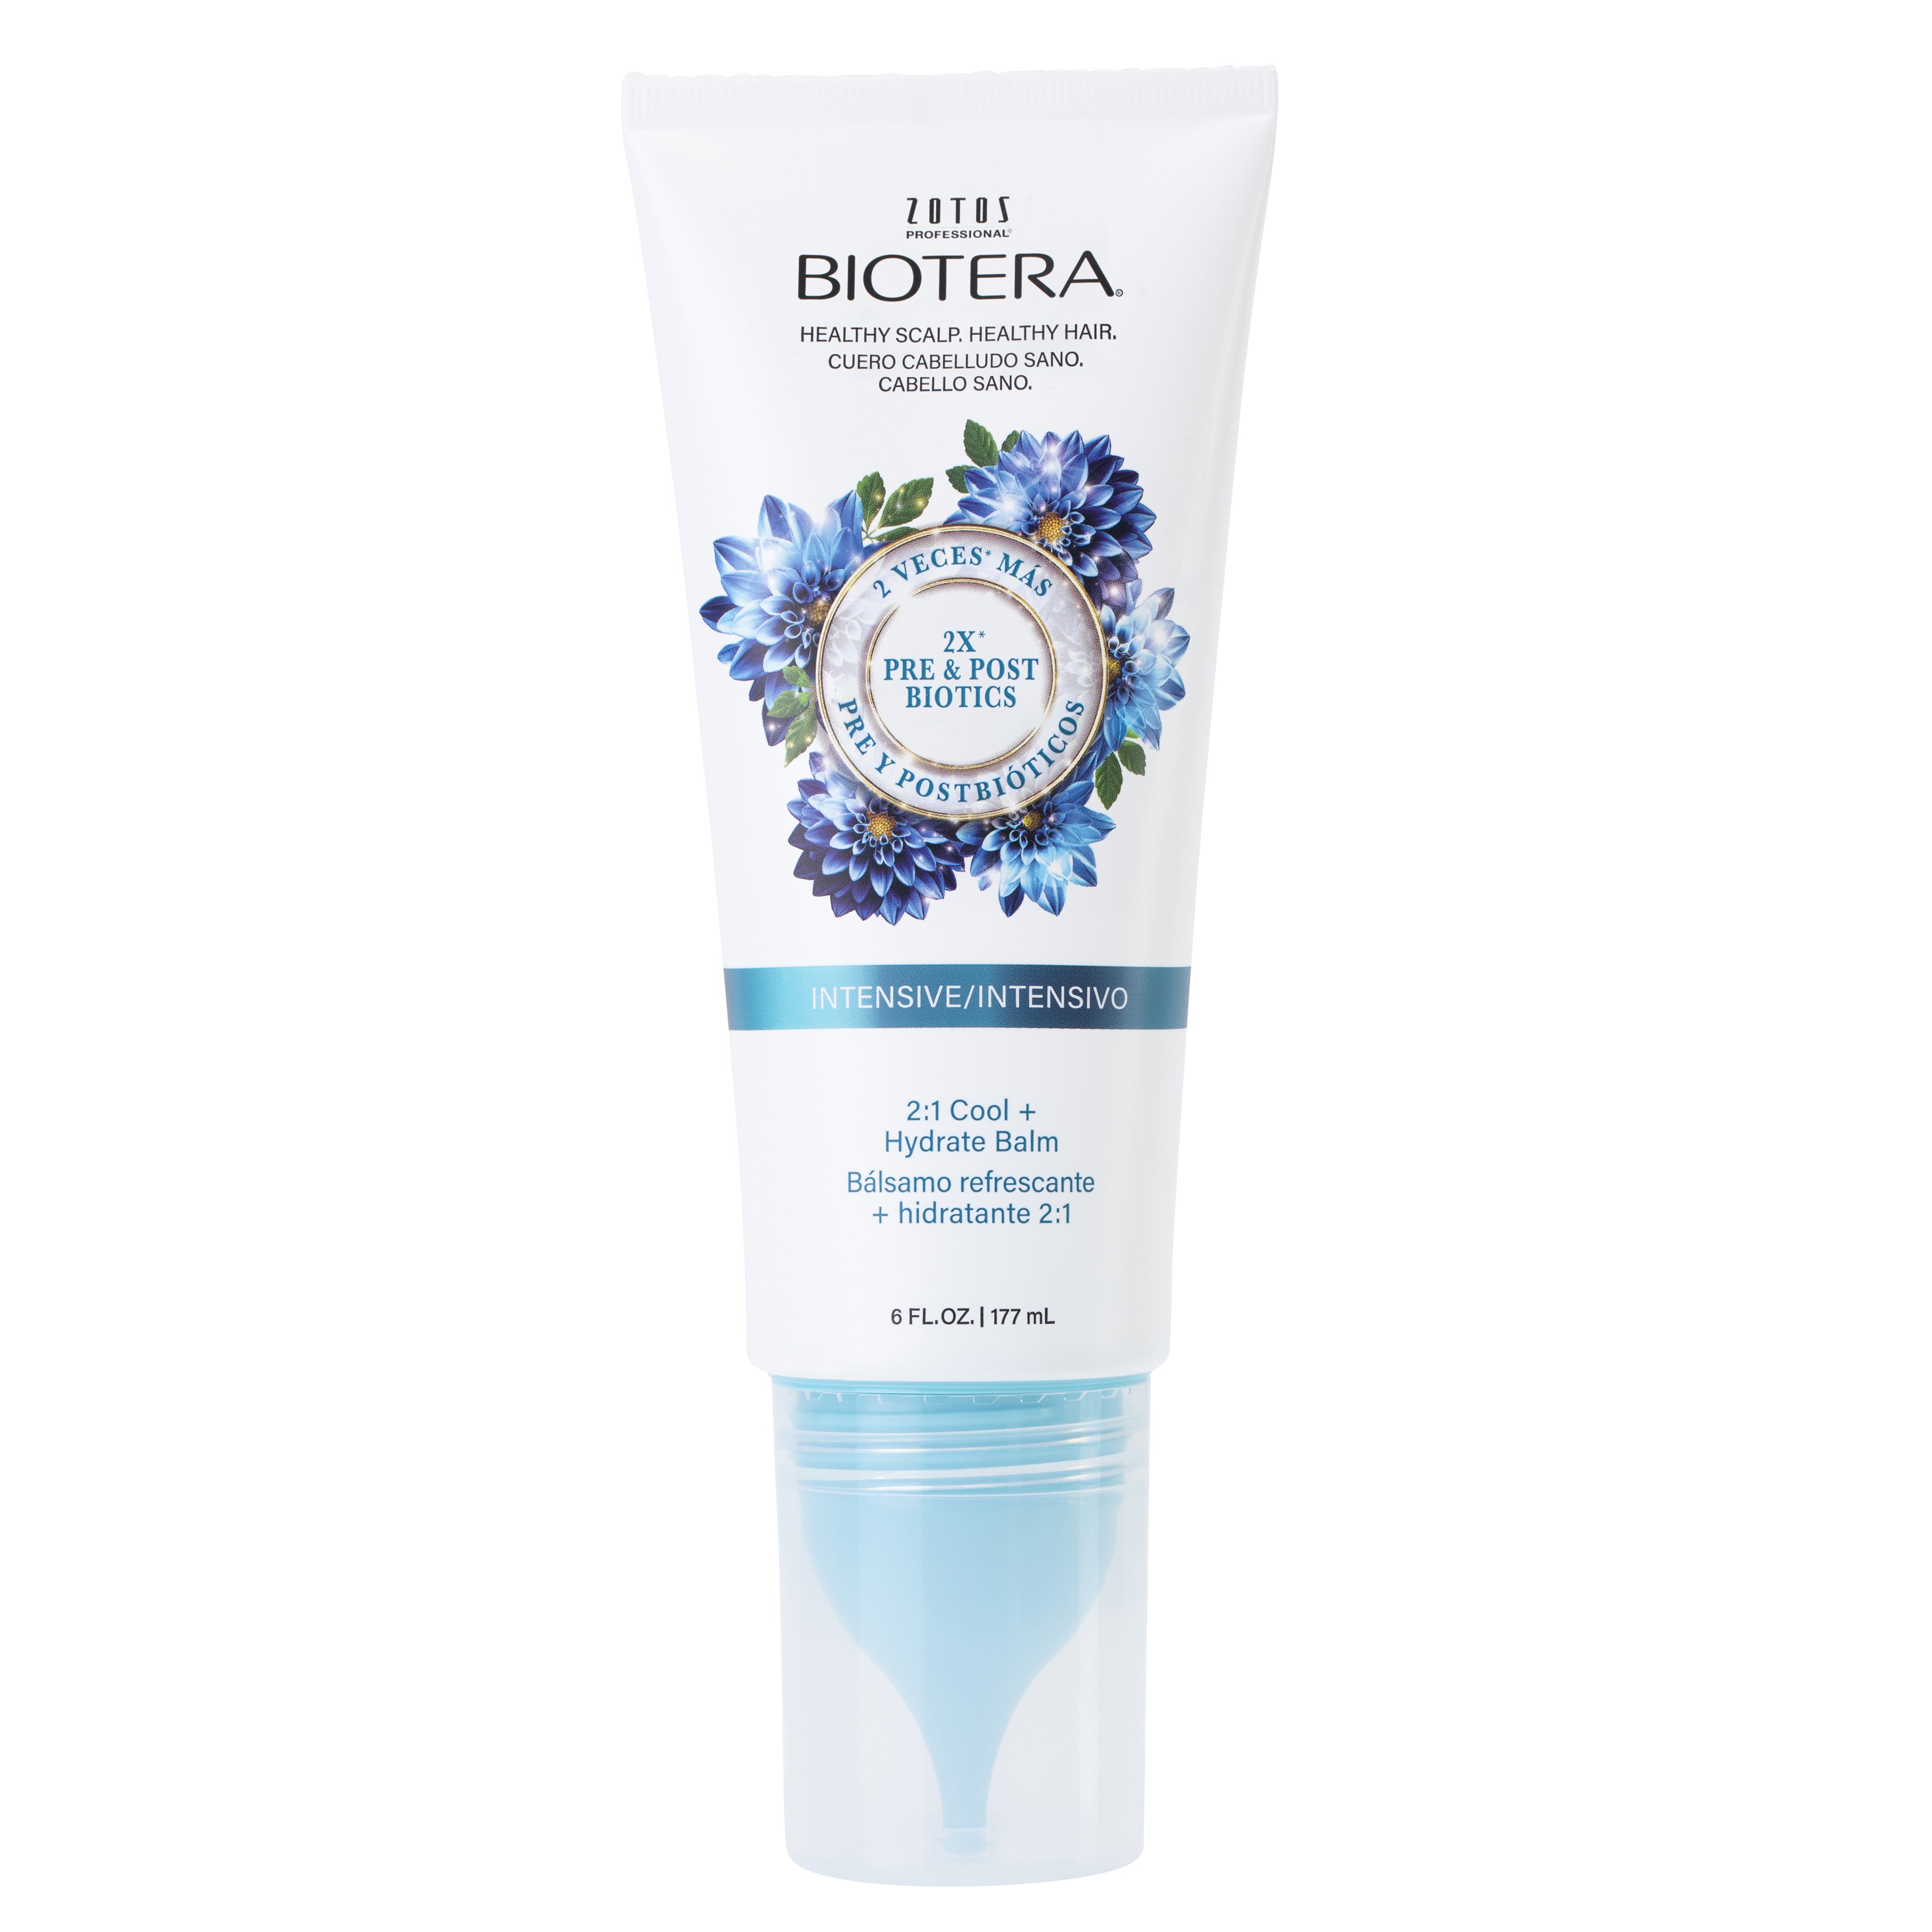 Biotera Intensives 2:1 Cool and Hydrate Balm tube.